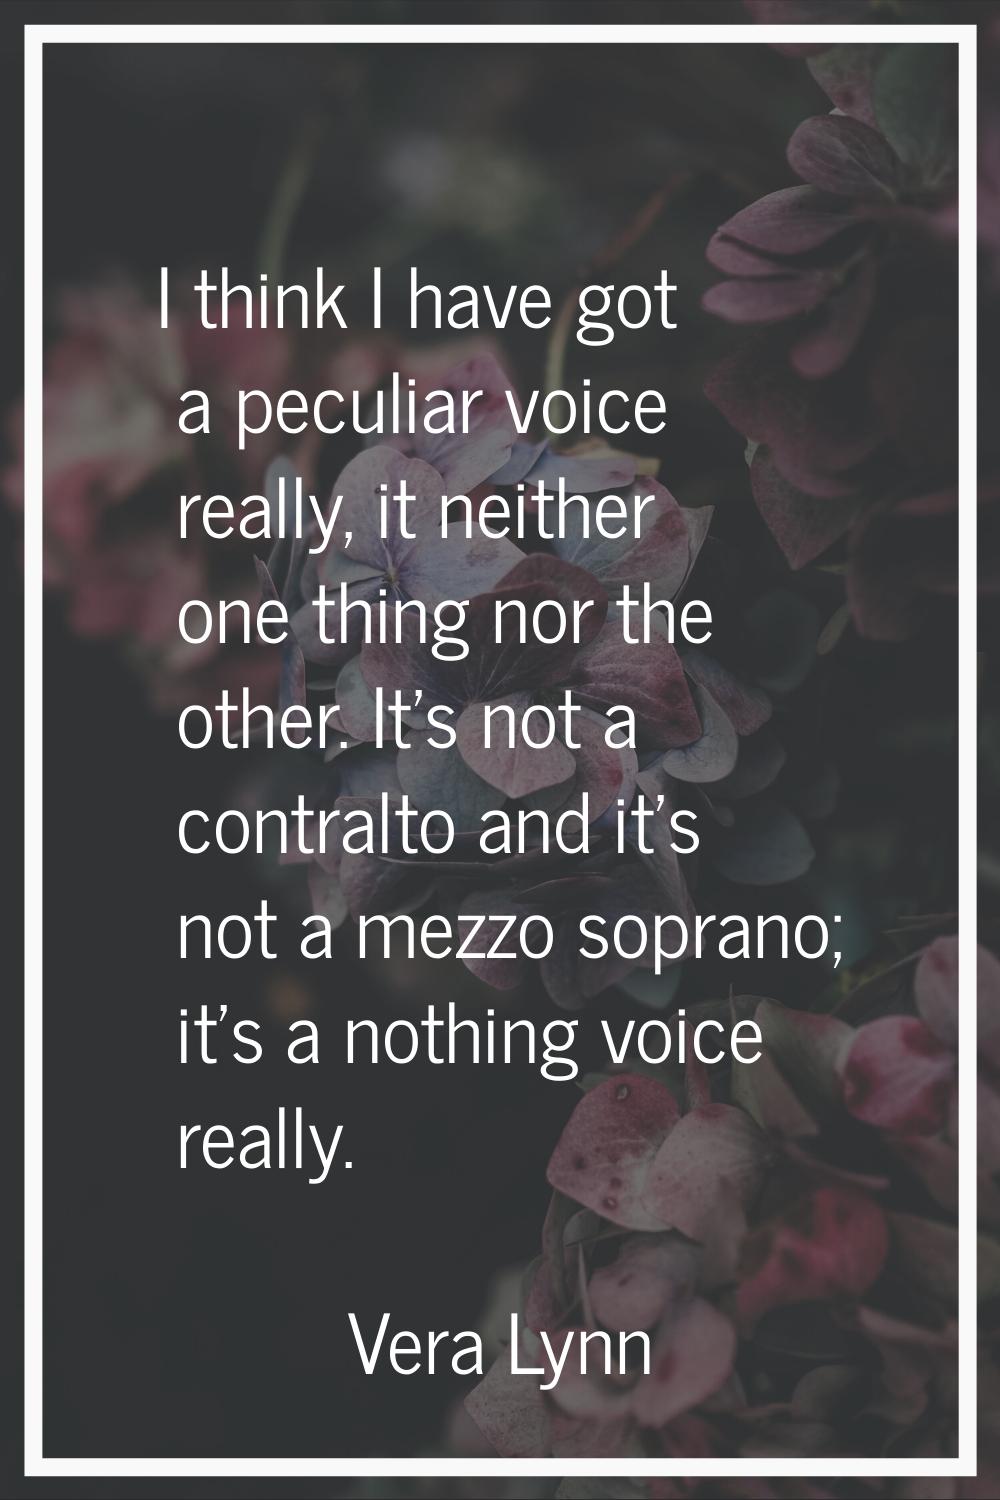 I think I have got a peculiar voice really, it neither one thing nor the other. It's not a contralt